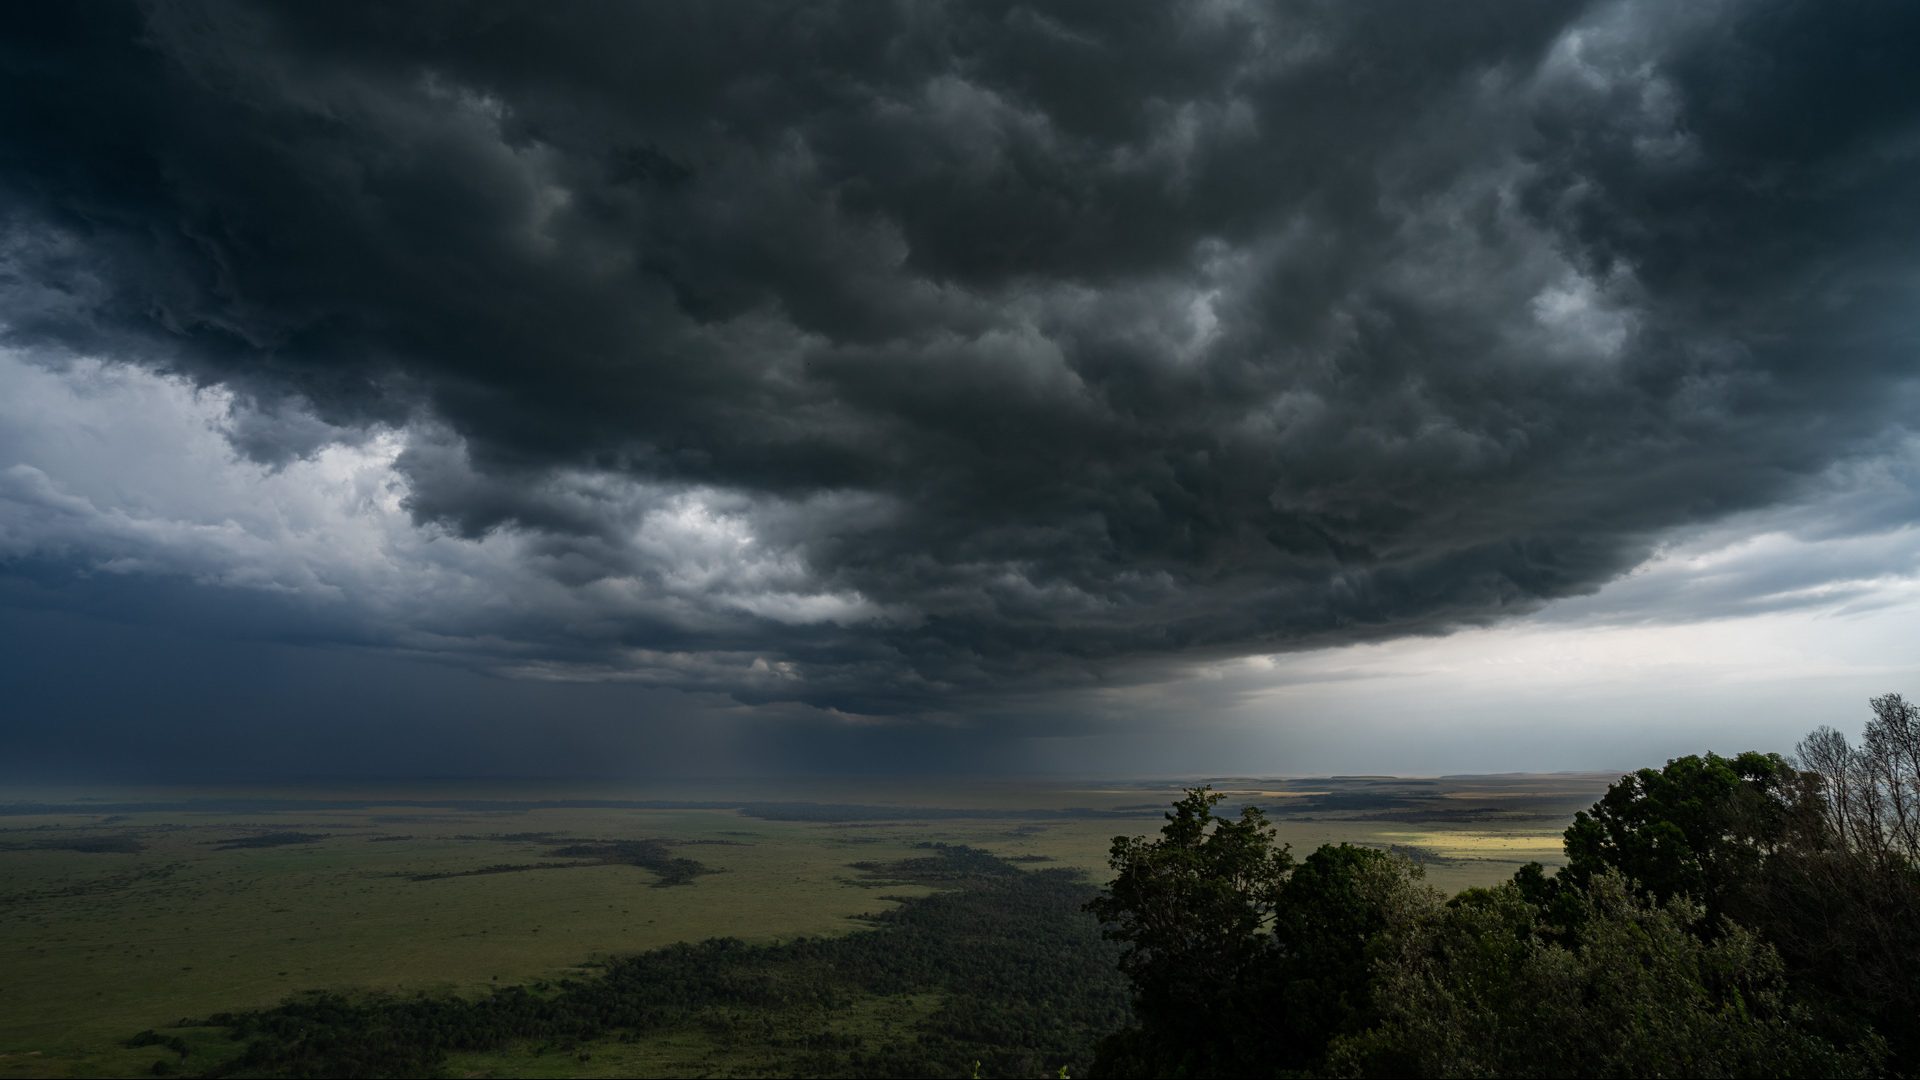 Above: Much to our delight, life-giving rains have fallen in the Mara